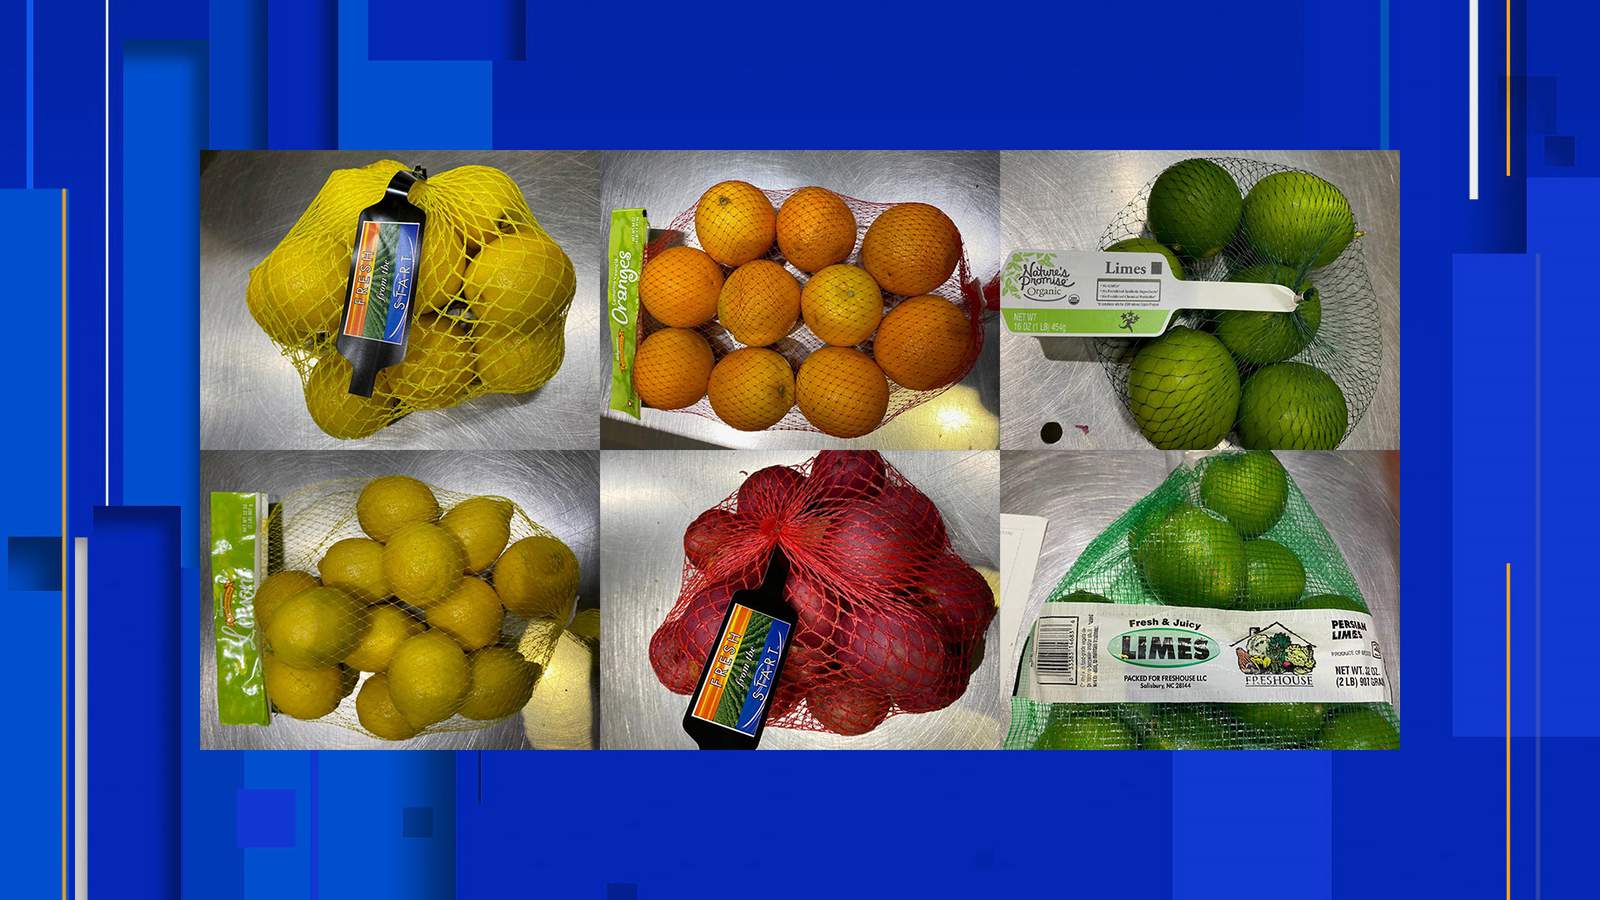 Limes Oranges Lemons And Red Potatoes Recalled Over Potential Listeria Concerns